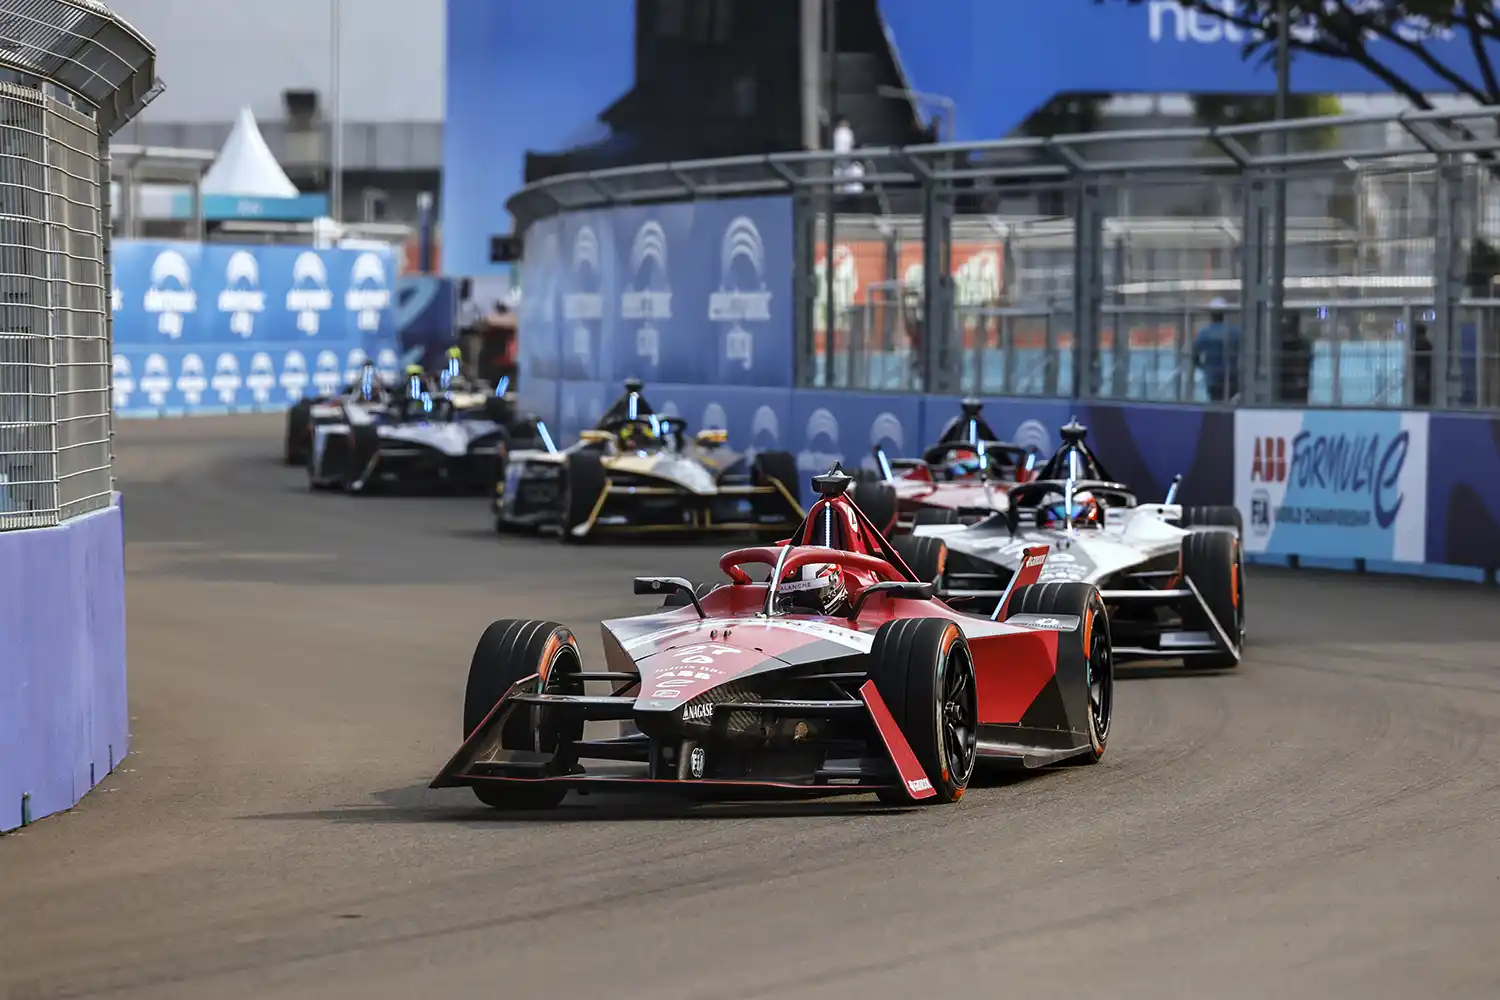 Dennis Leads Cassidy By Single Point As Formula E Closes In On Championship Finale Wheelz-English